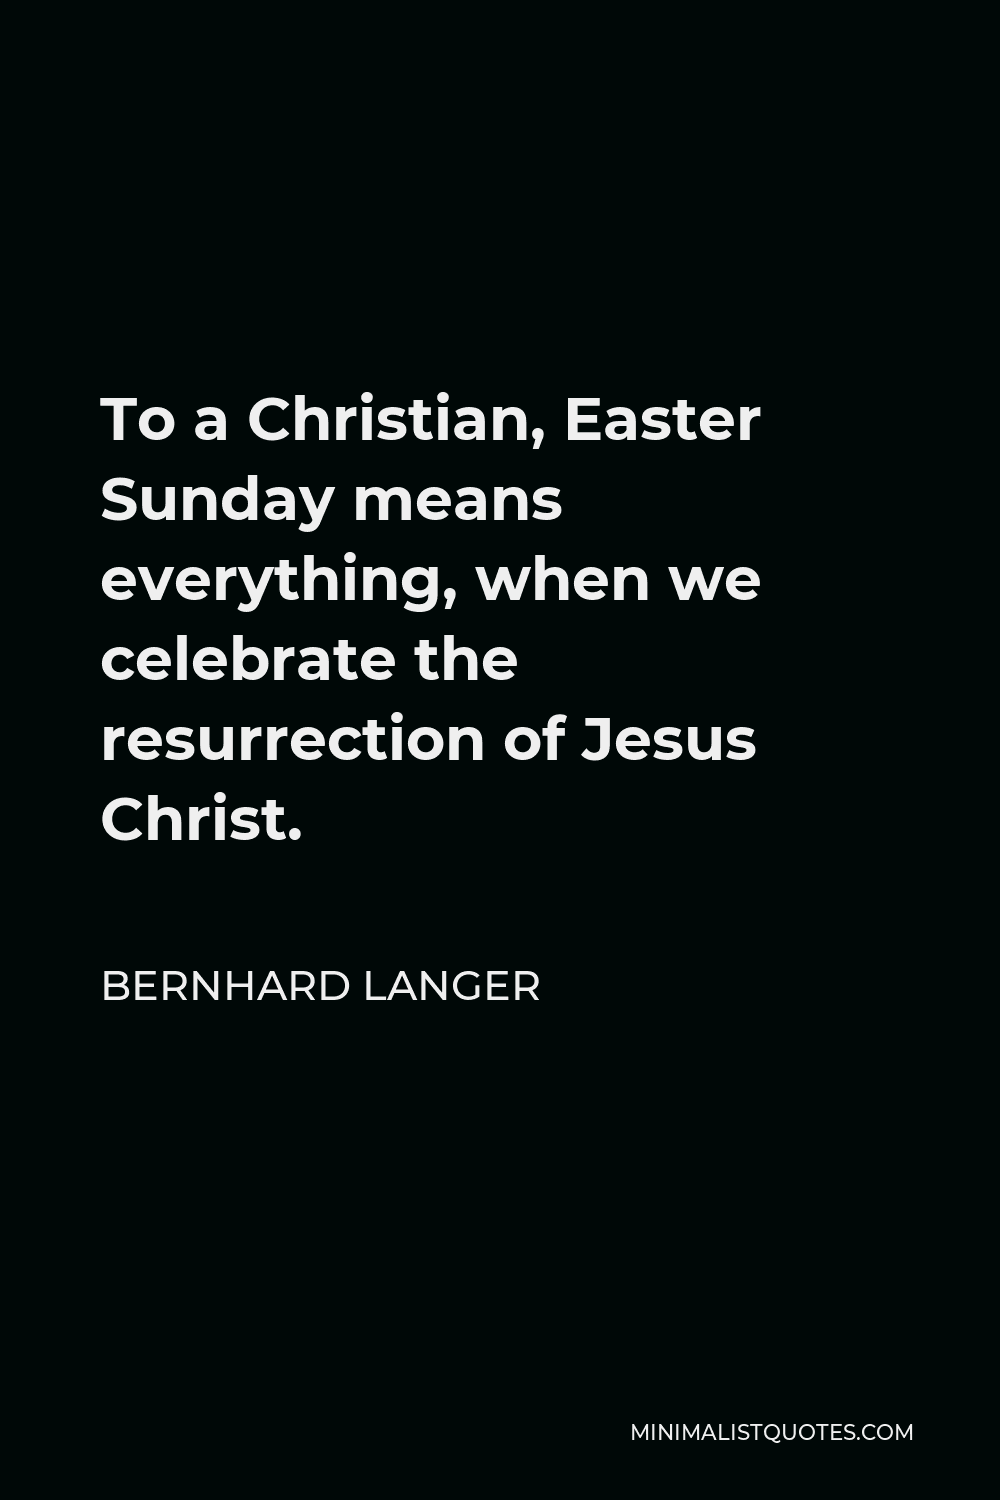 Bernhard Langer Quote - To a Christian, Easter Sunday means everything, when we celebrate the resurrection of Jesus Christ.